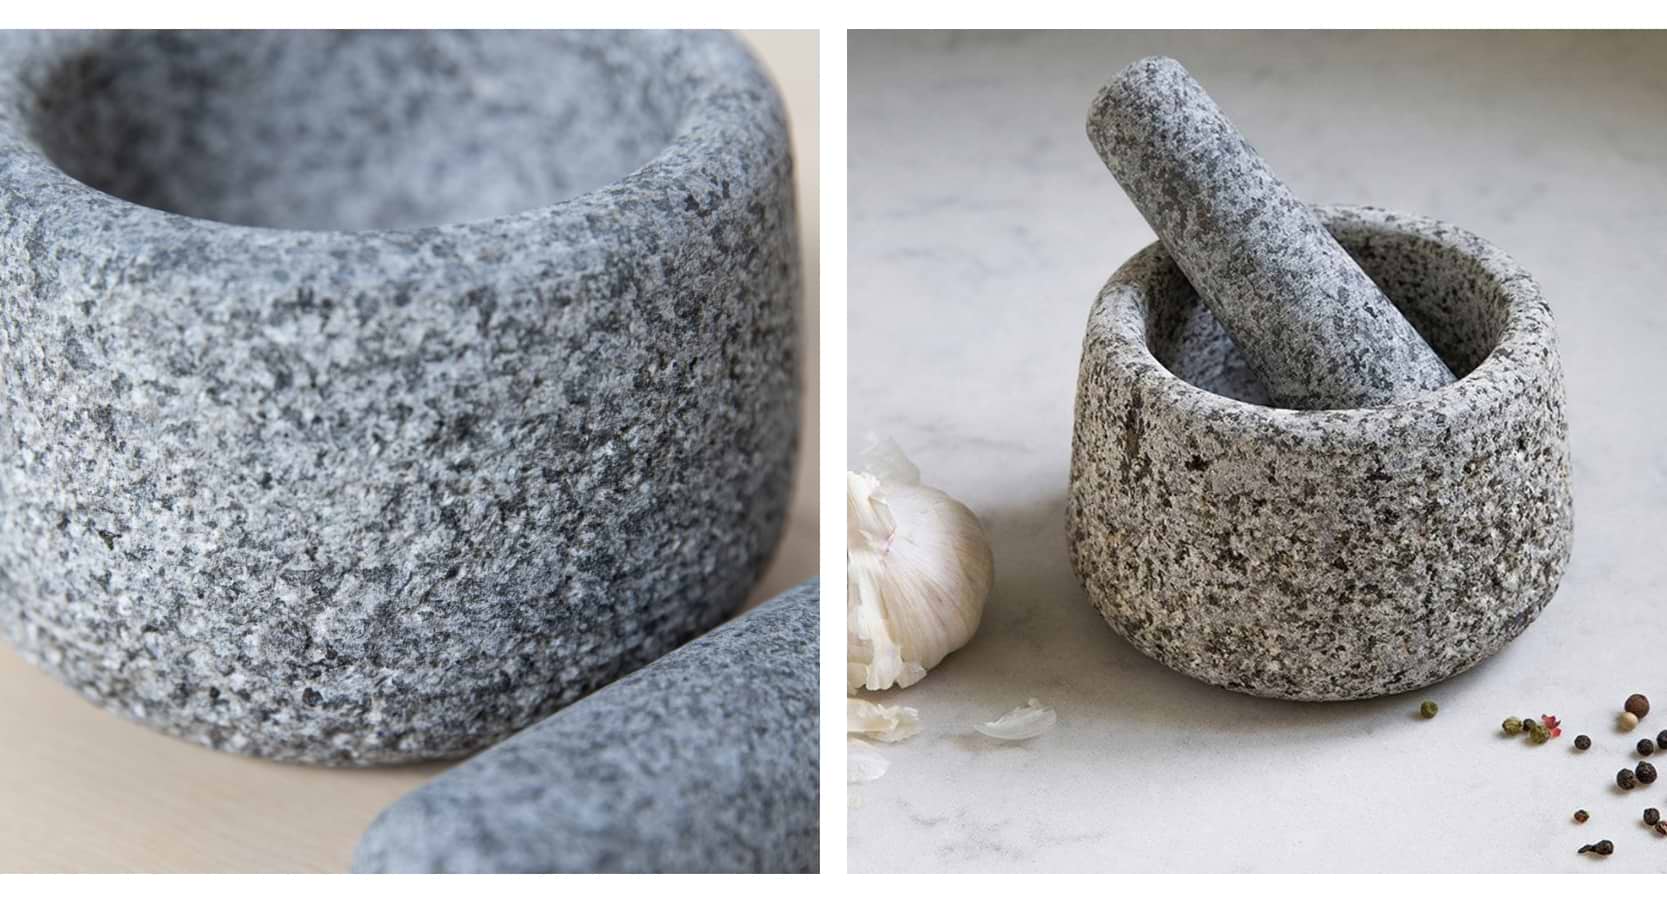 Granite Pestle and Mortar in natural stone finish, placed on a countertop with fresh herbs and spices.